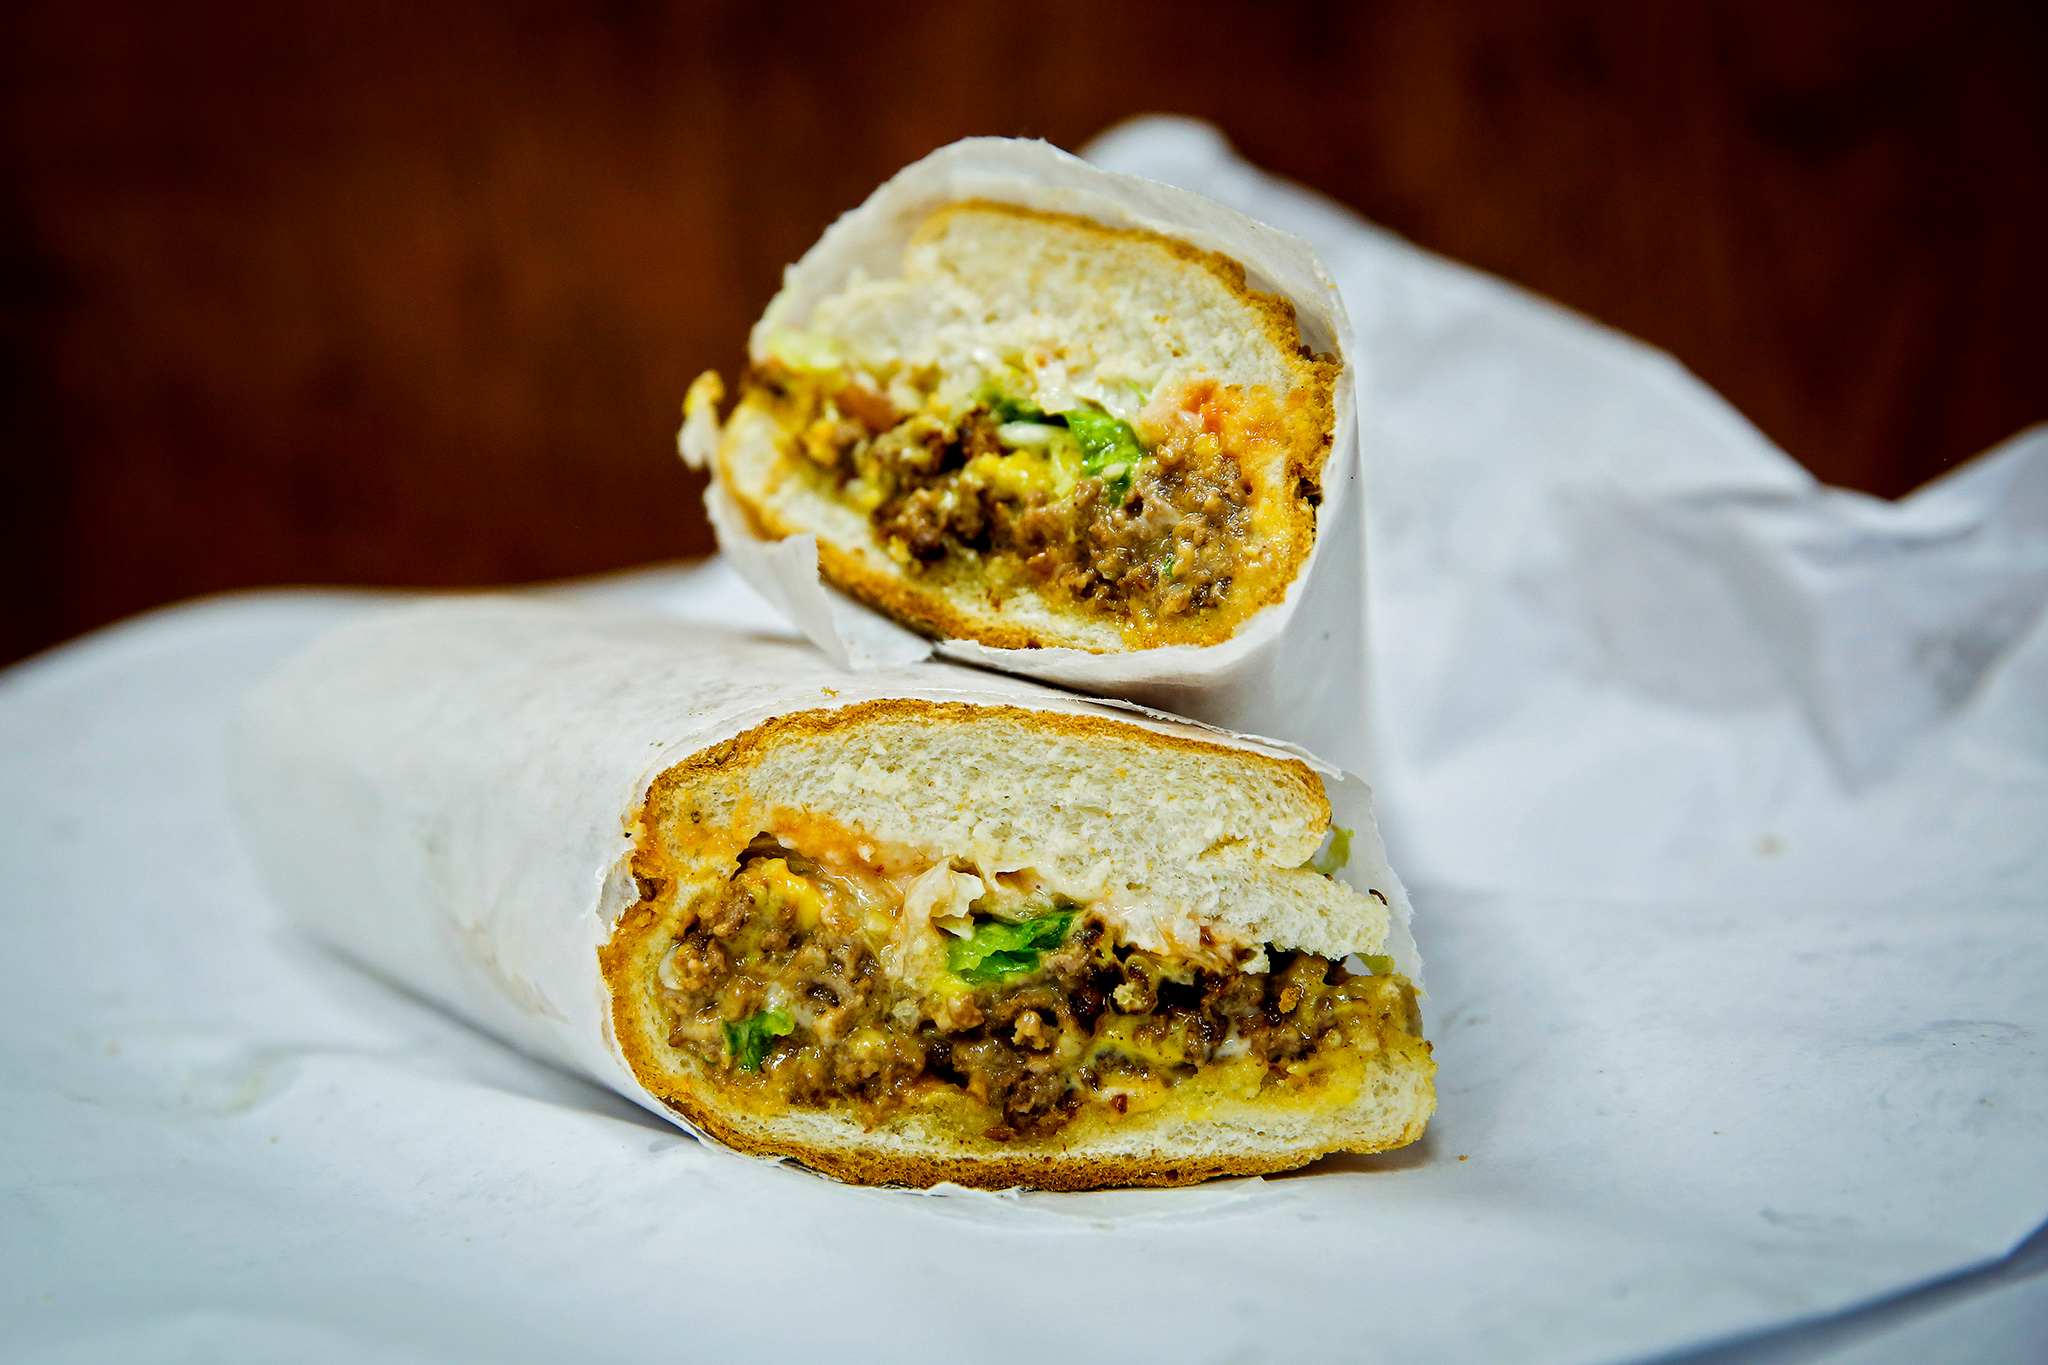 A new restaurant brings chopped cheese to Berkeley